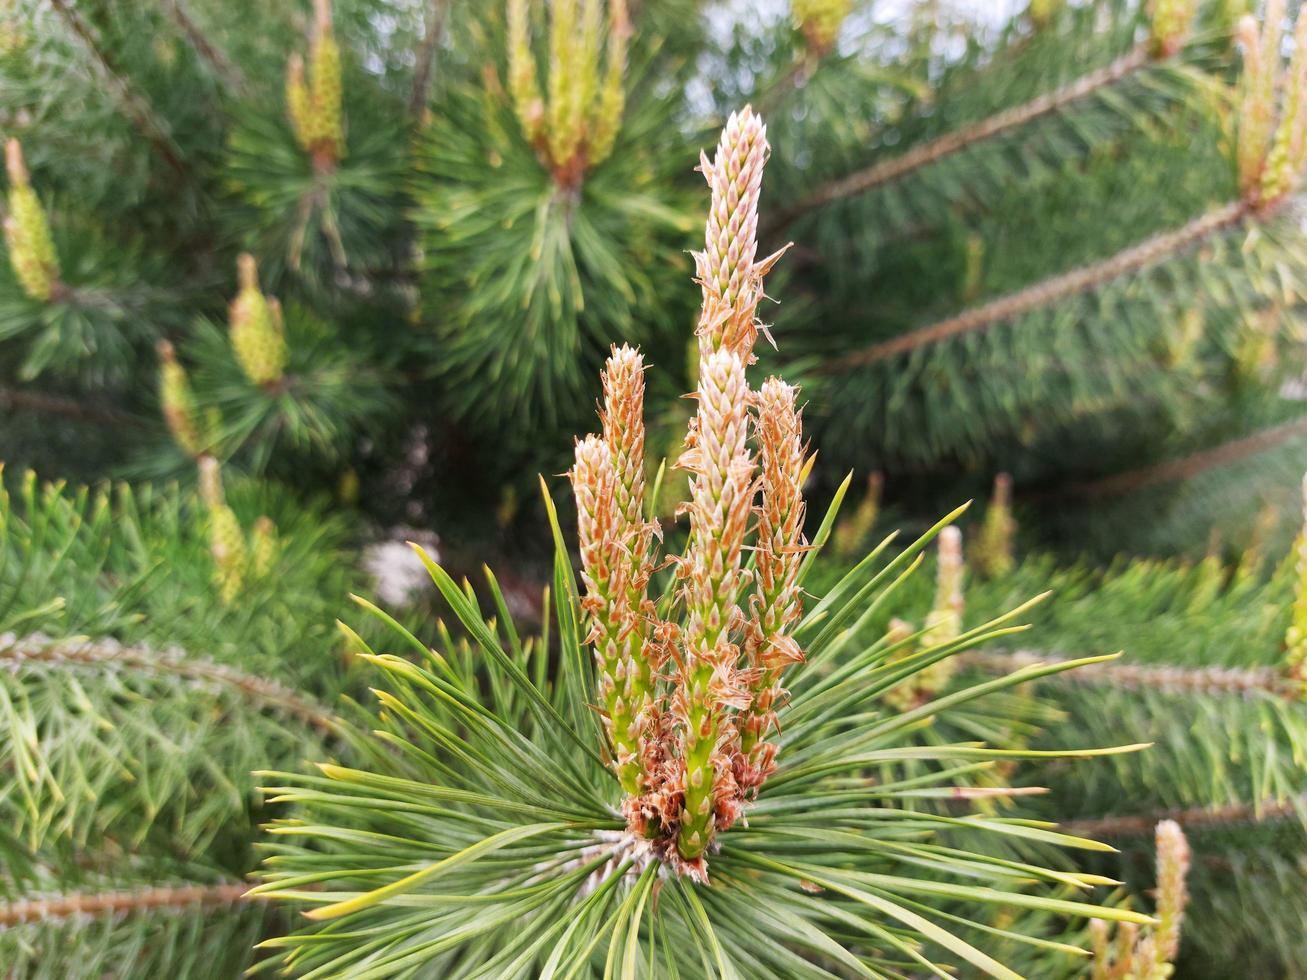 new spring shoots from budding pines photo